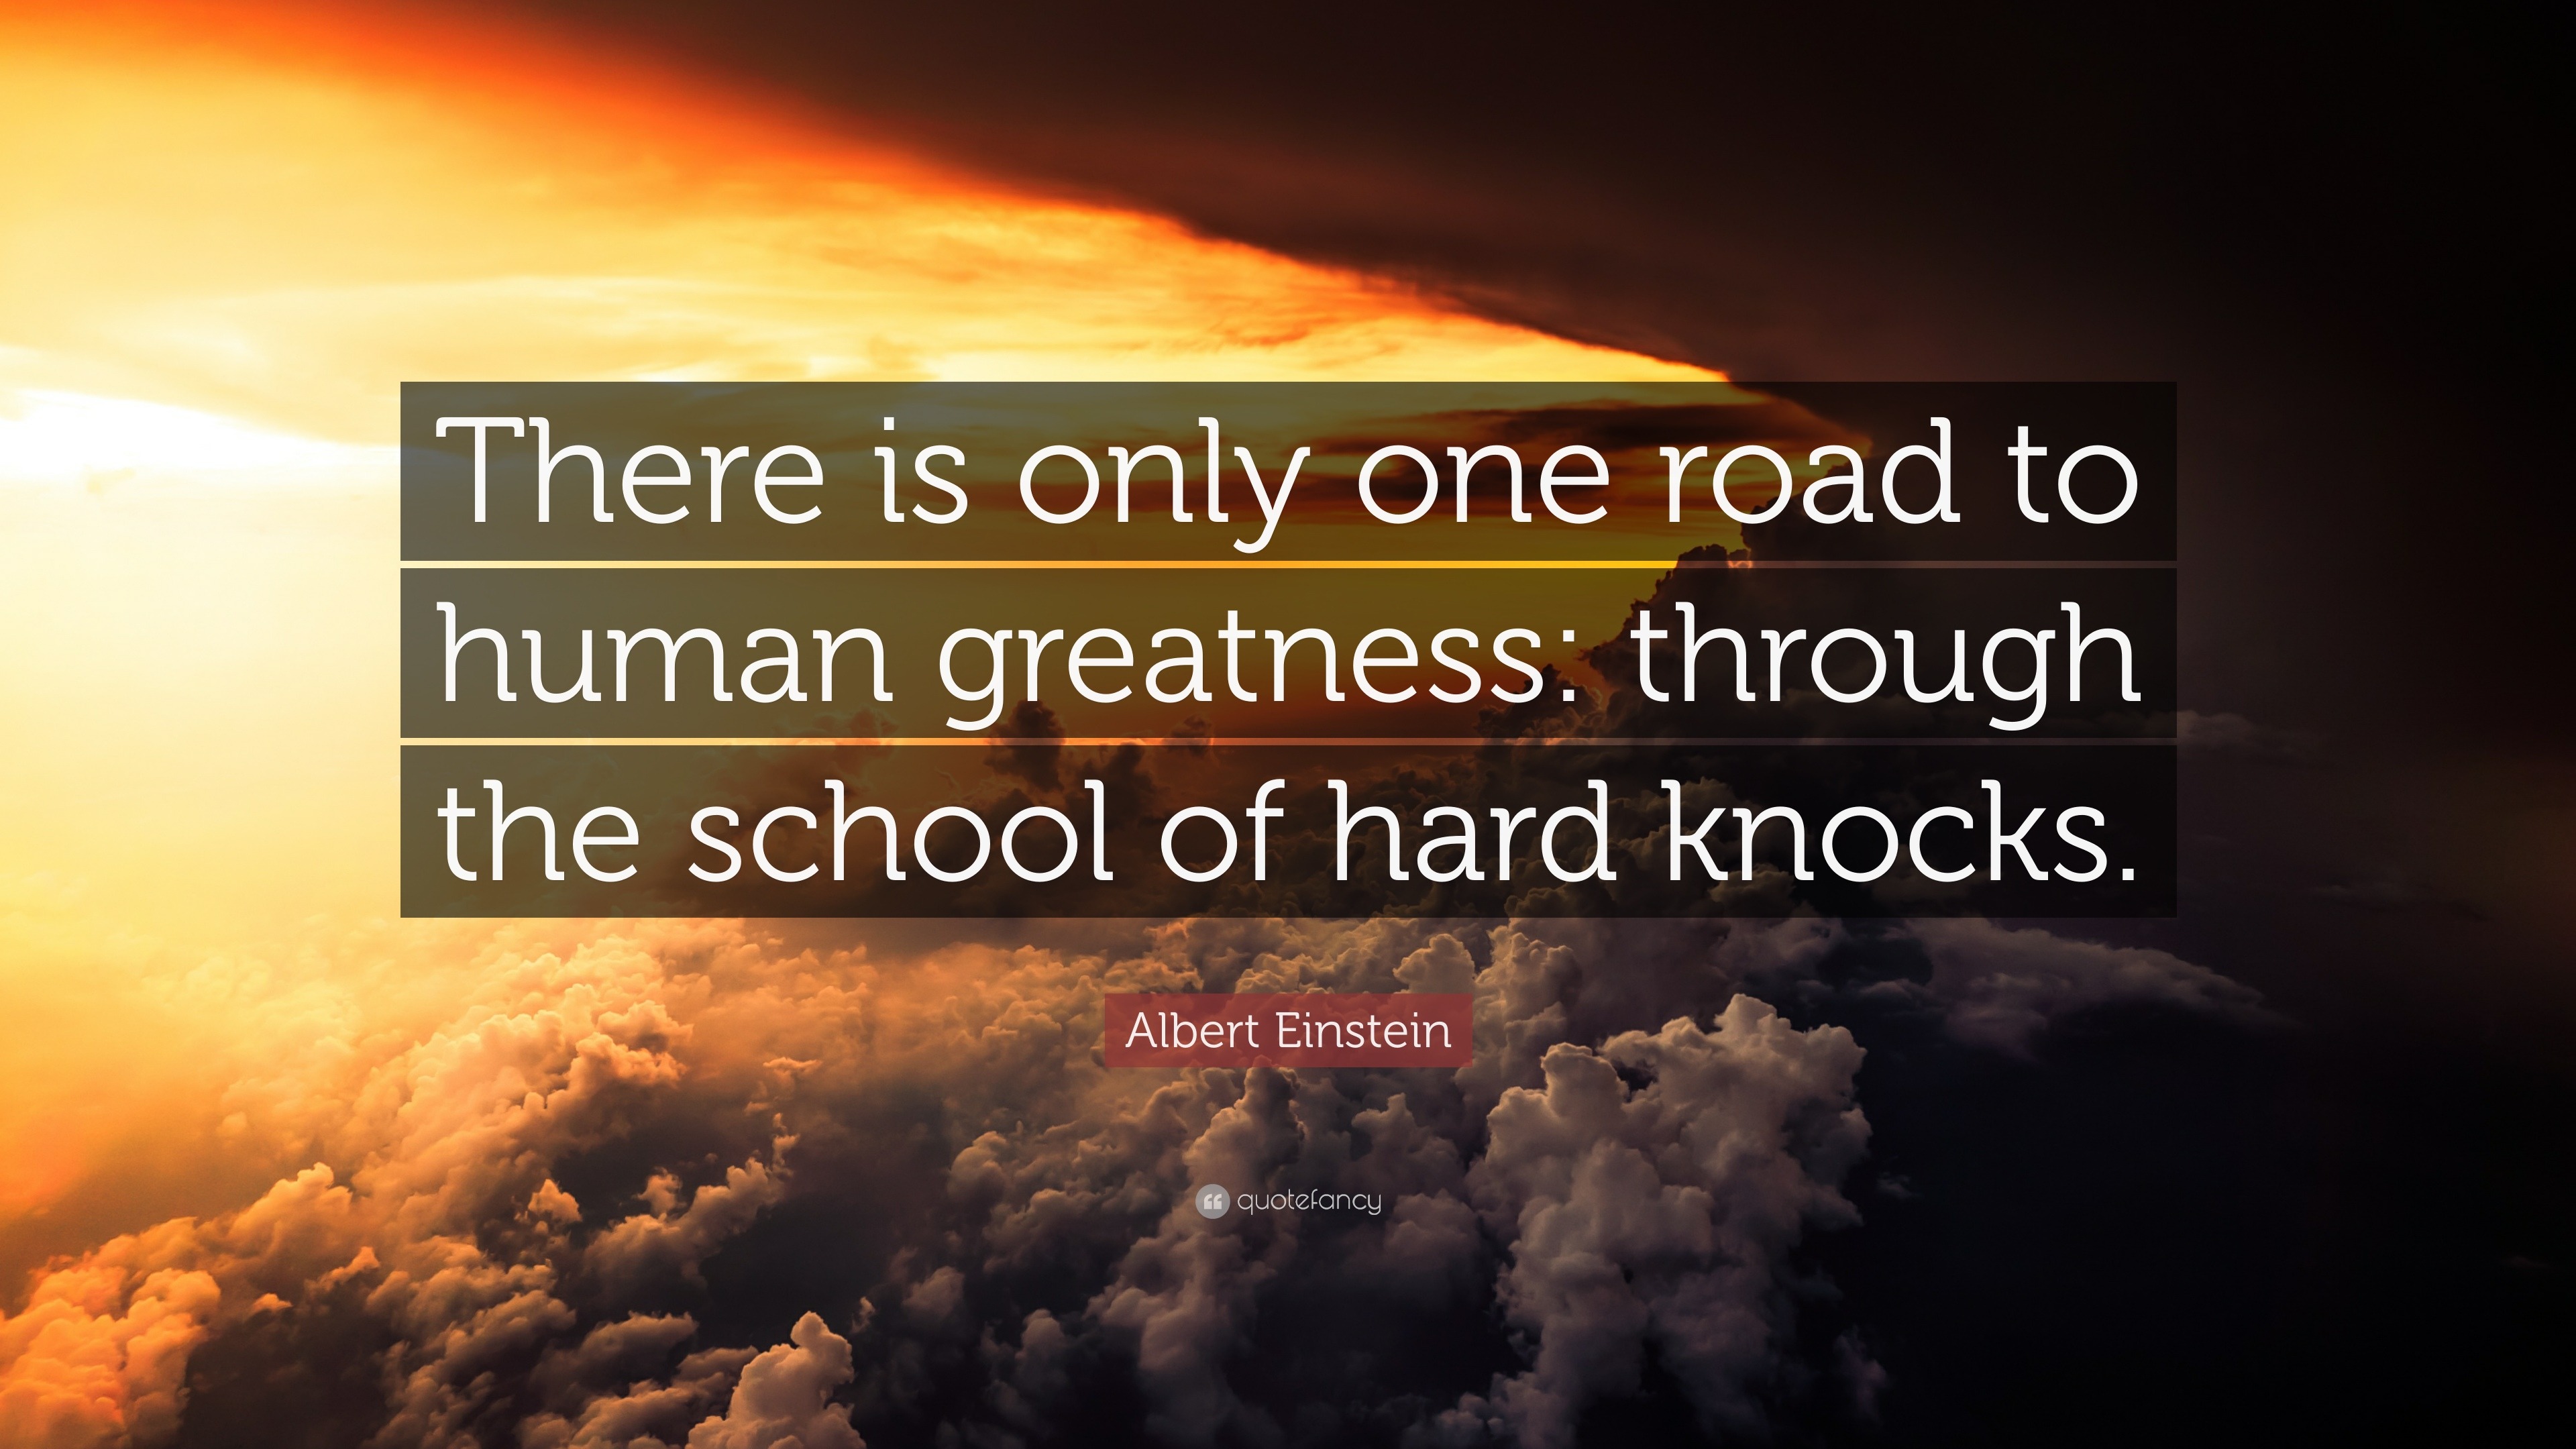 Albert Einstein Quote: “There is only one road to human greatness